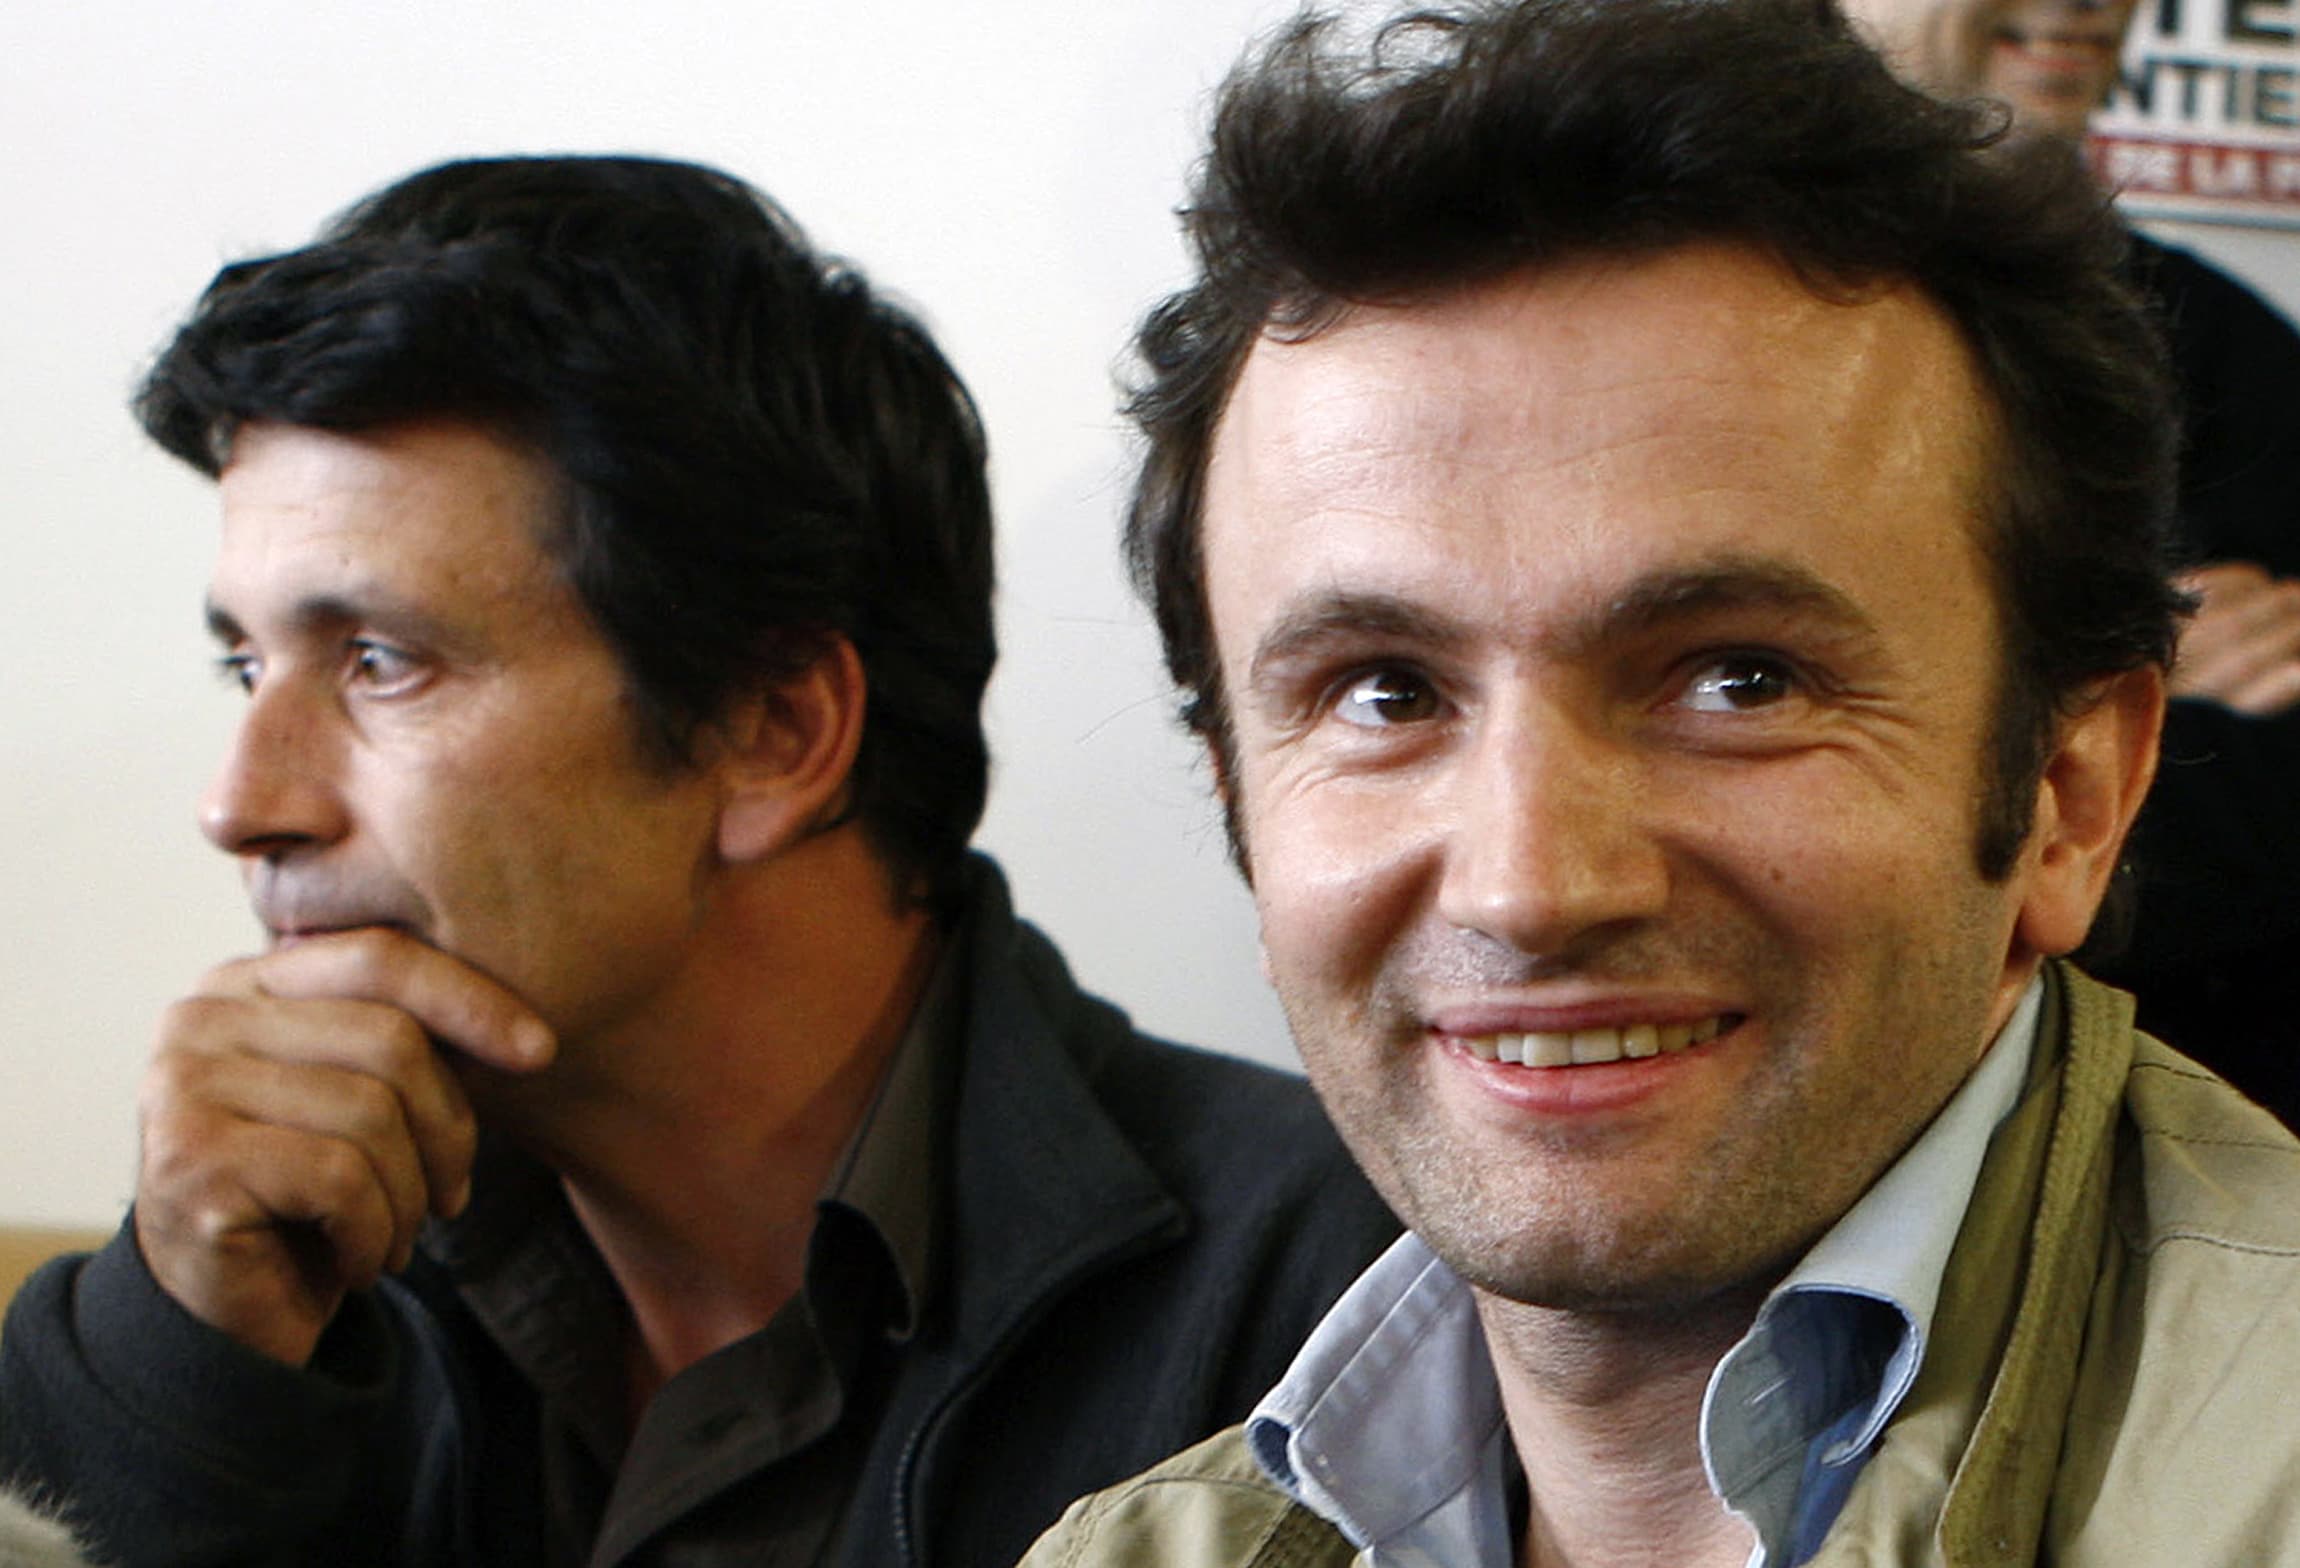 French journalist Thomas Dandois (R) is pictured during a January 2008 news conference in Paris, after returning from Niger where he and his colleague Pierre Creisson (L) had been detained, REUTERS/Antoine Gyori